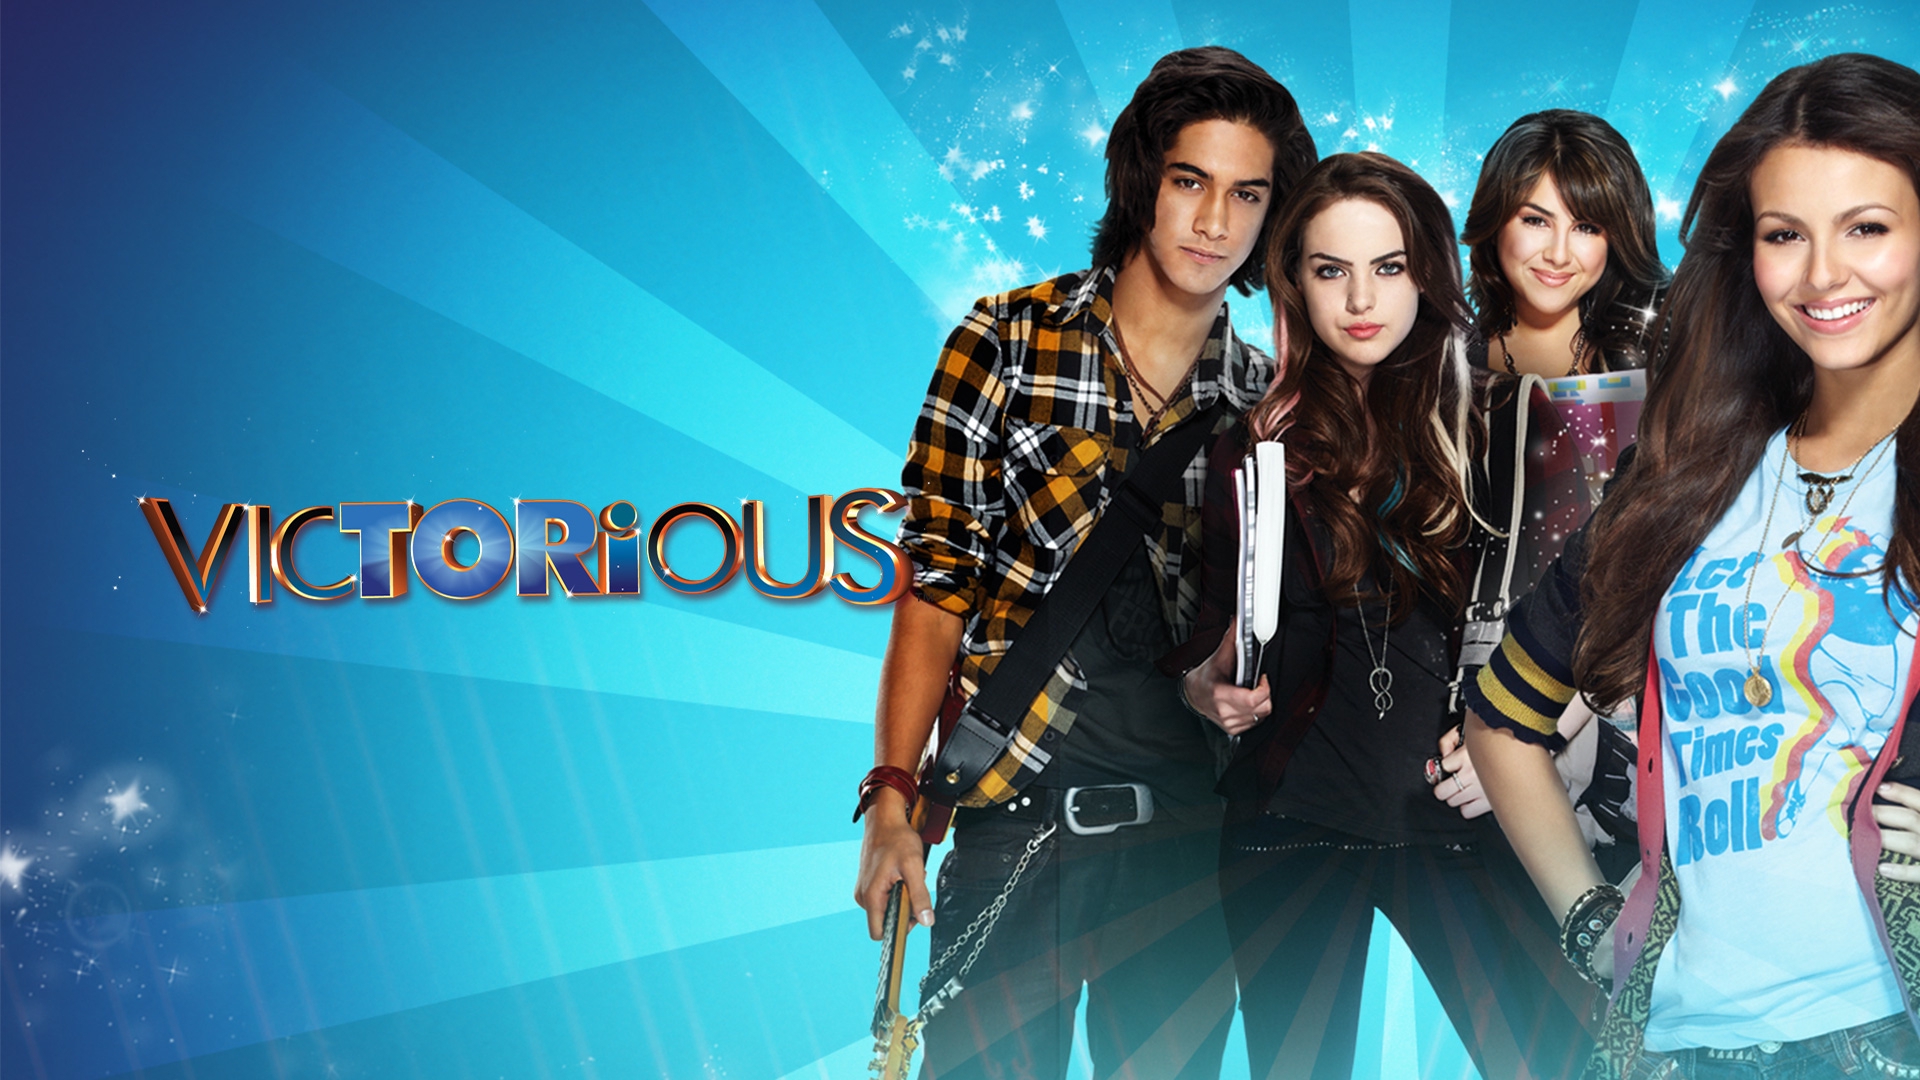 Watch Victorious Online, Stream Seasons 1-3 Now